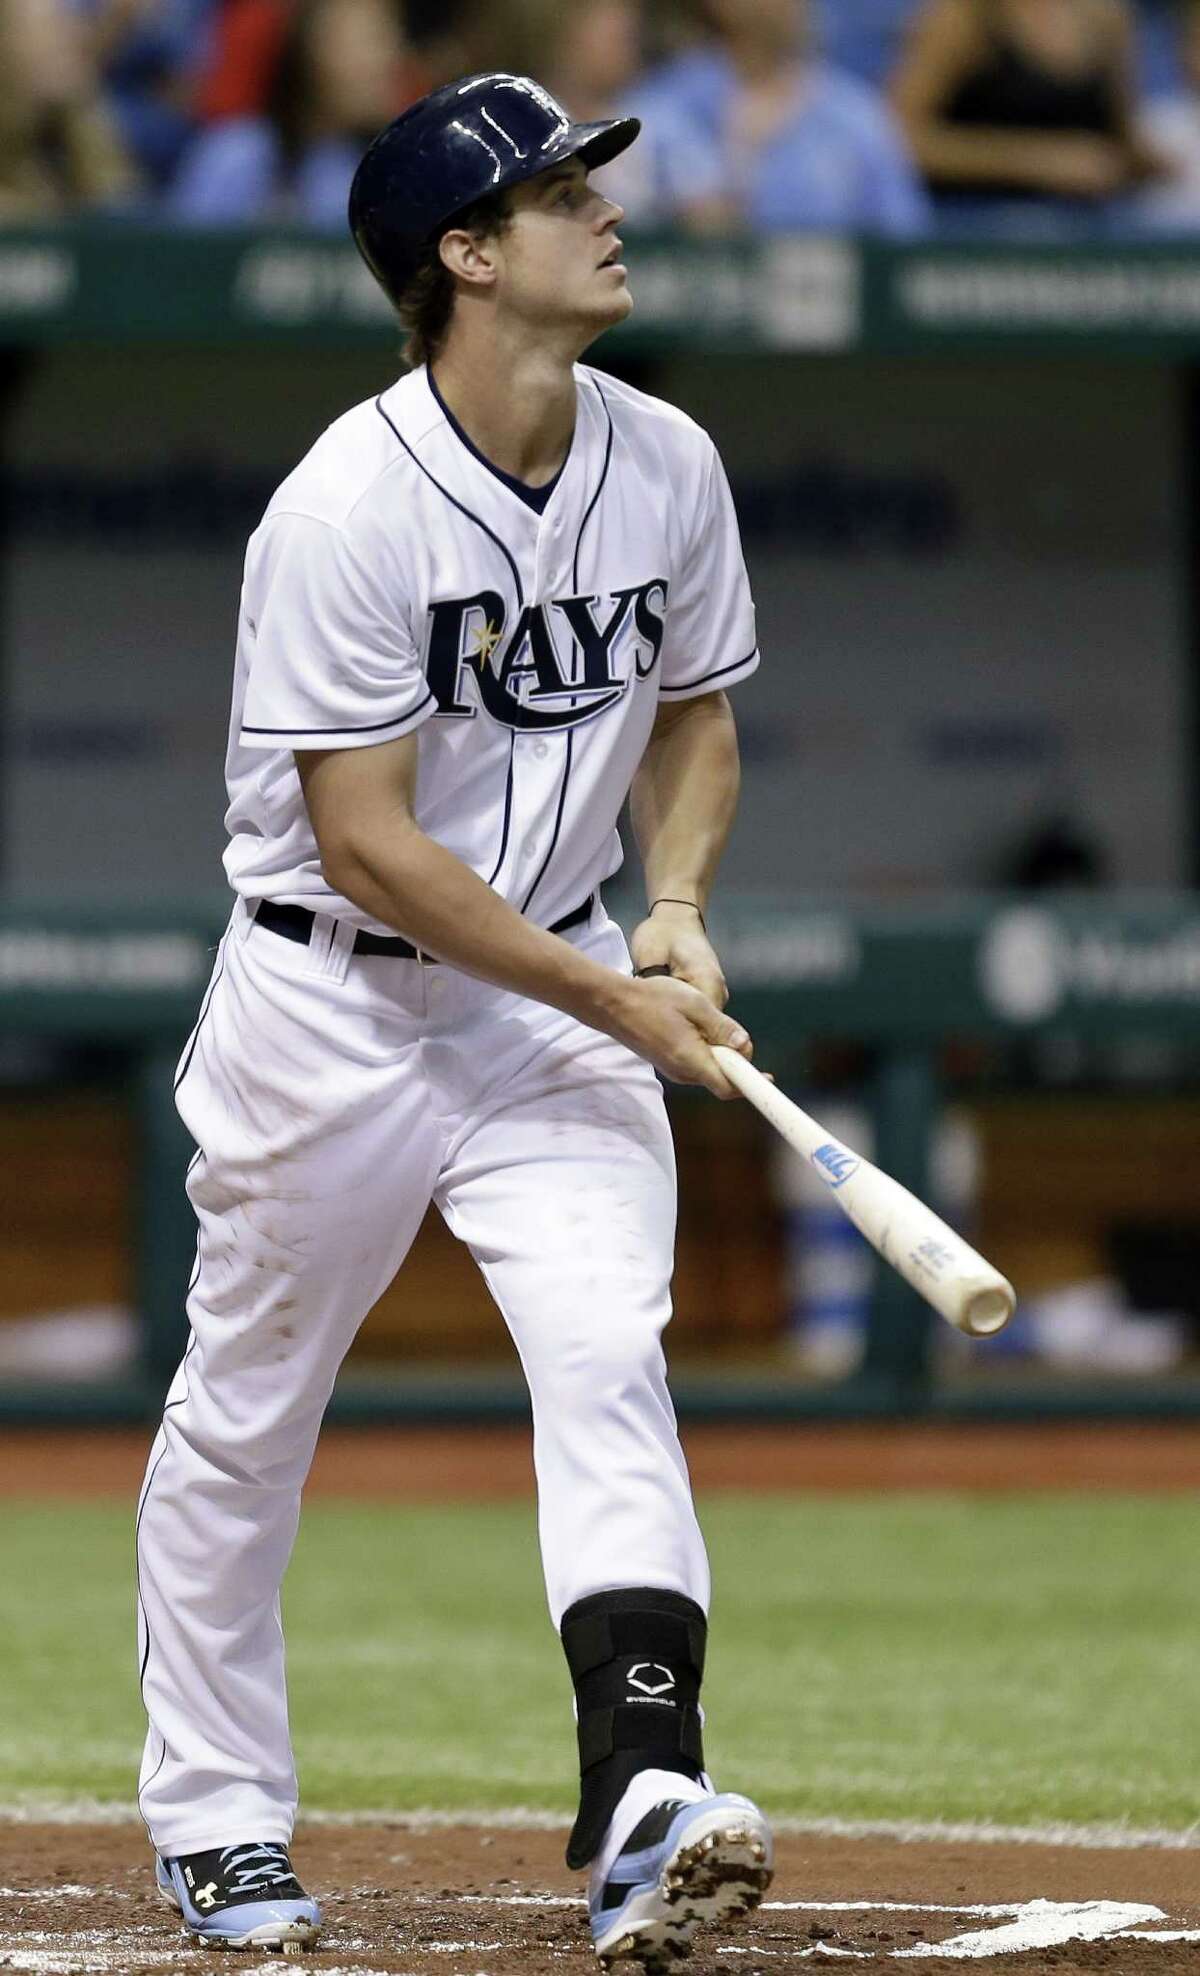 Tampa Bay's Wil Myers watches his second-inning home run Monday against Toronto. His blast was one of the Rays' three straight homers in the inning.